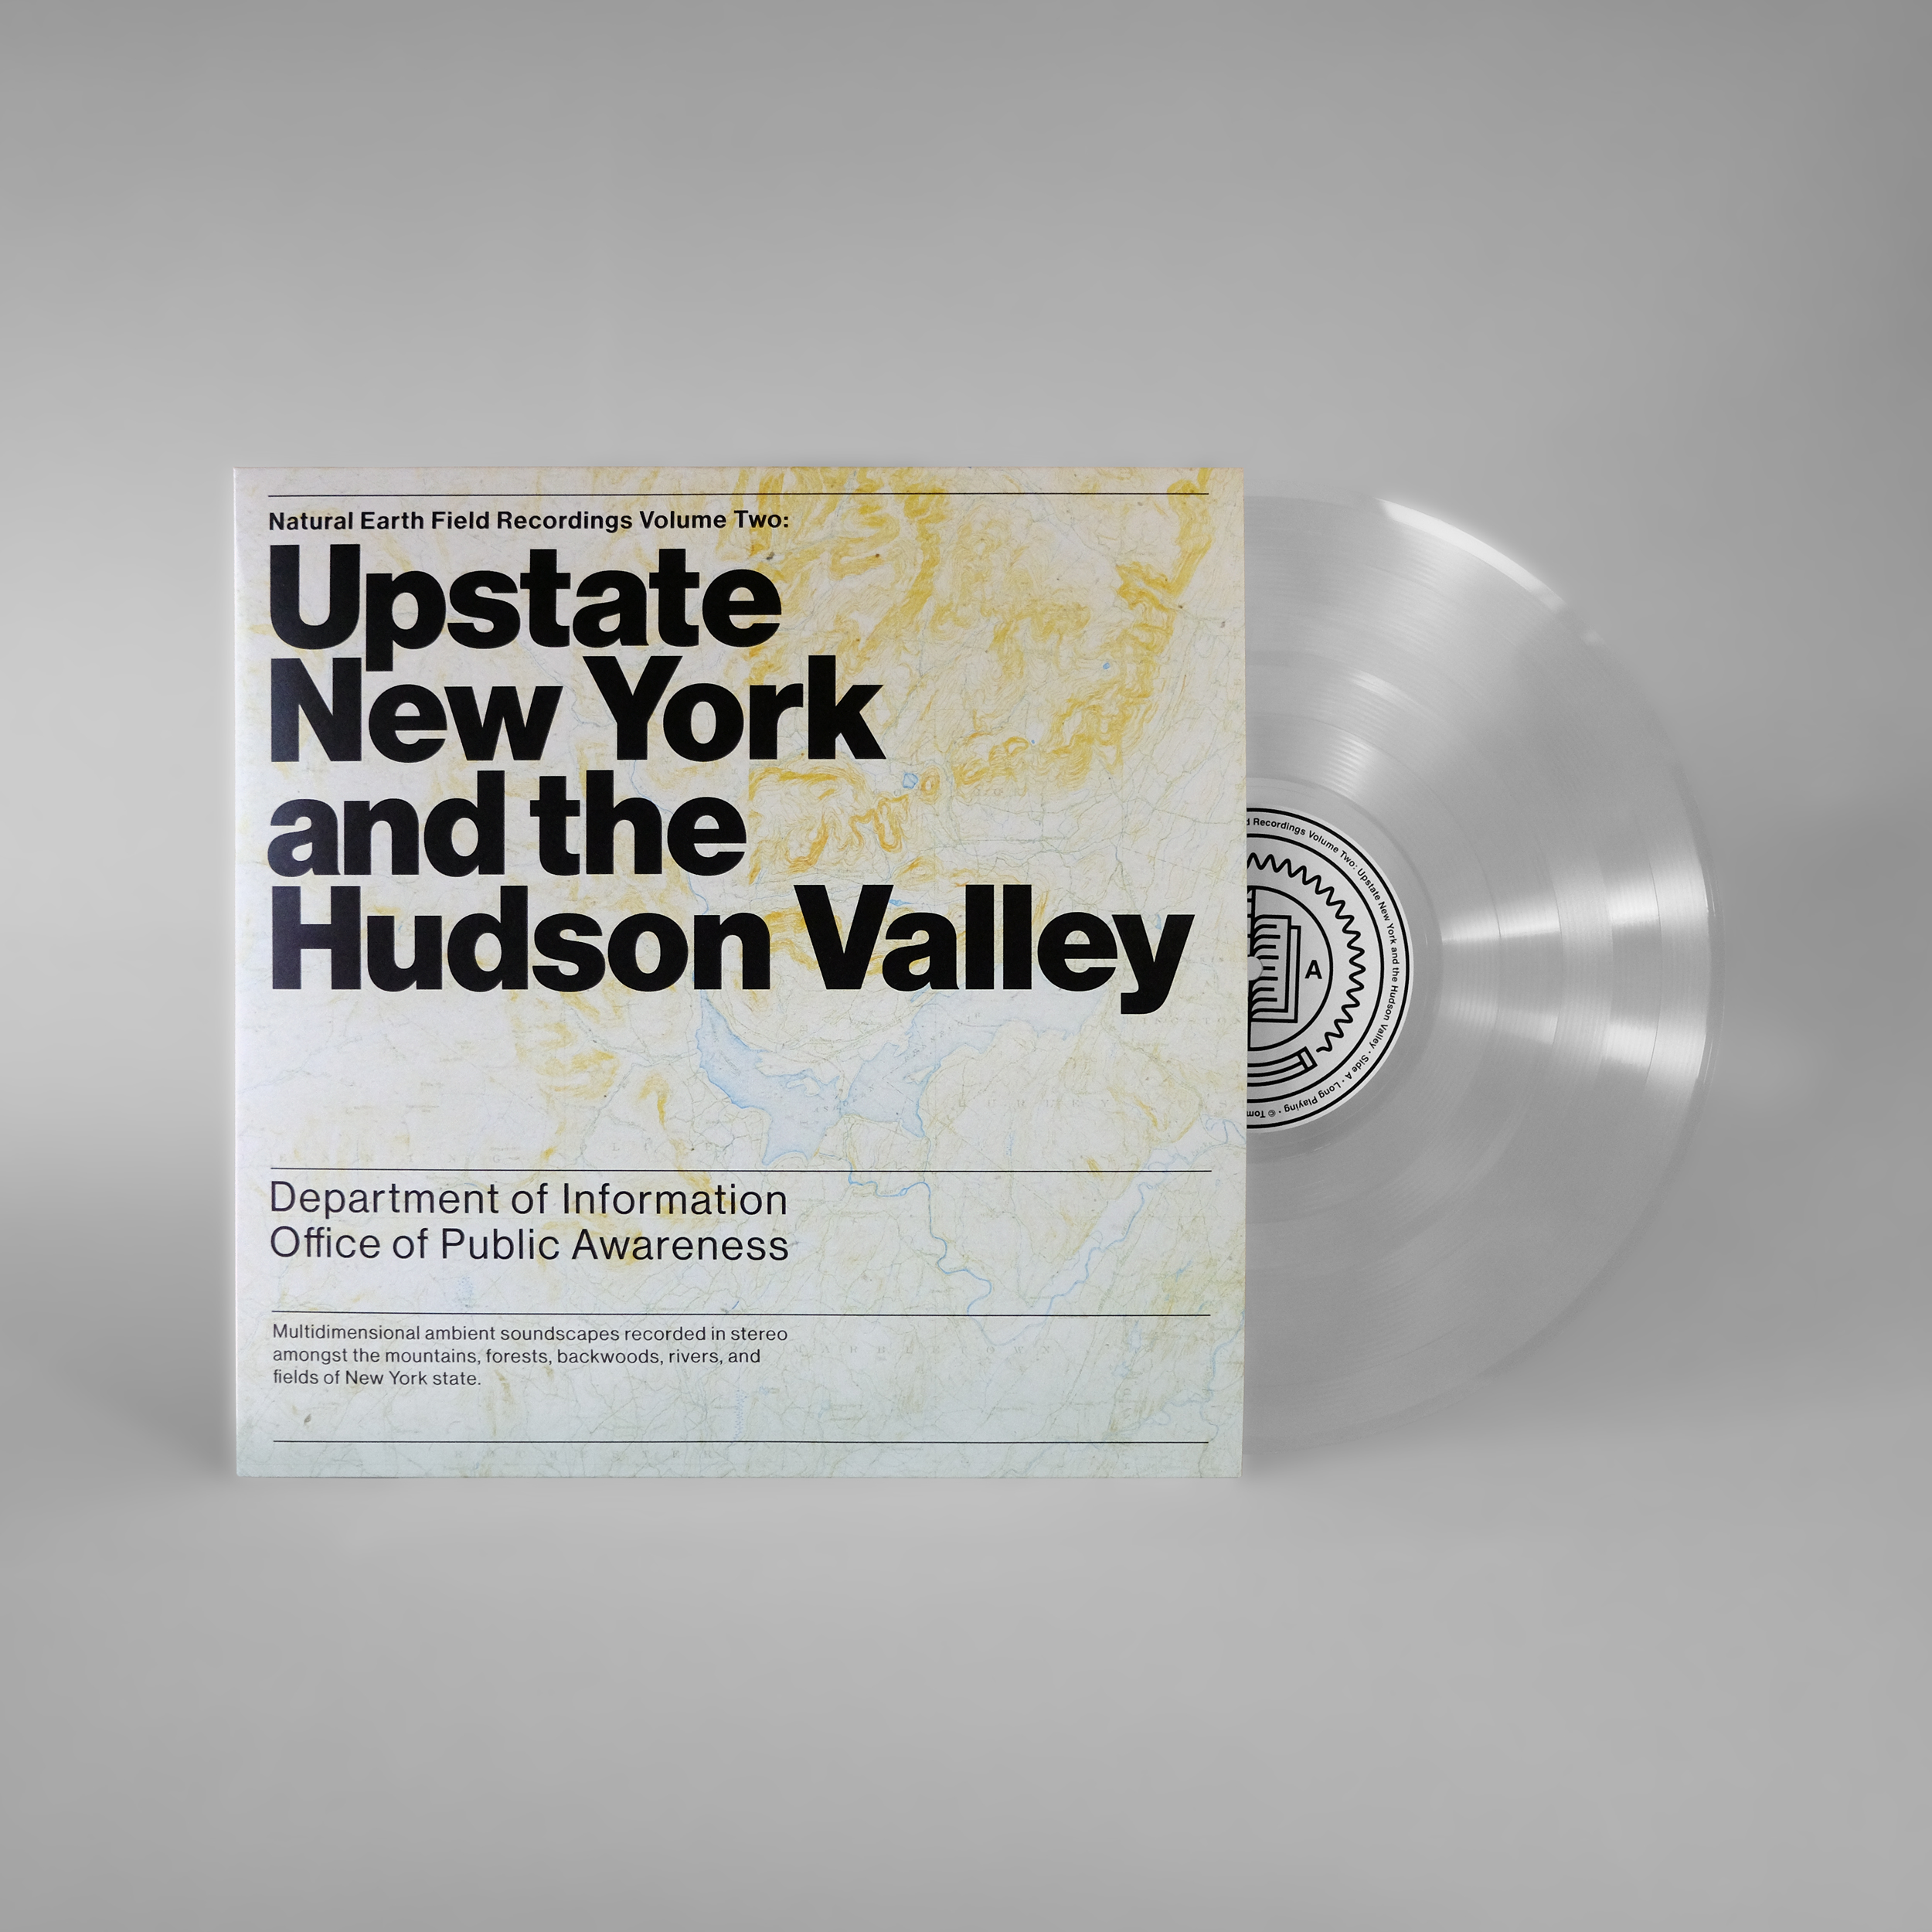 Photo of the album Natural Earth Field Recordings Vol 2: Upstate New York and the Hudson Valley by the Department of Information